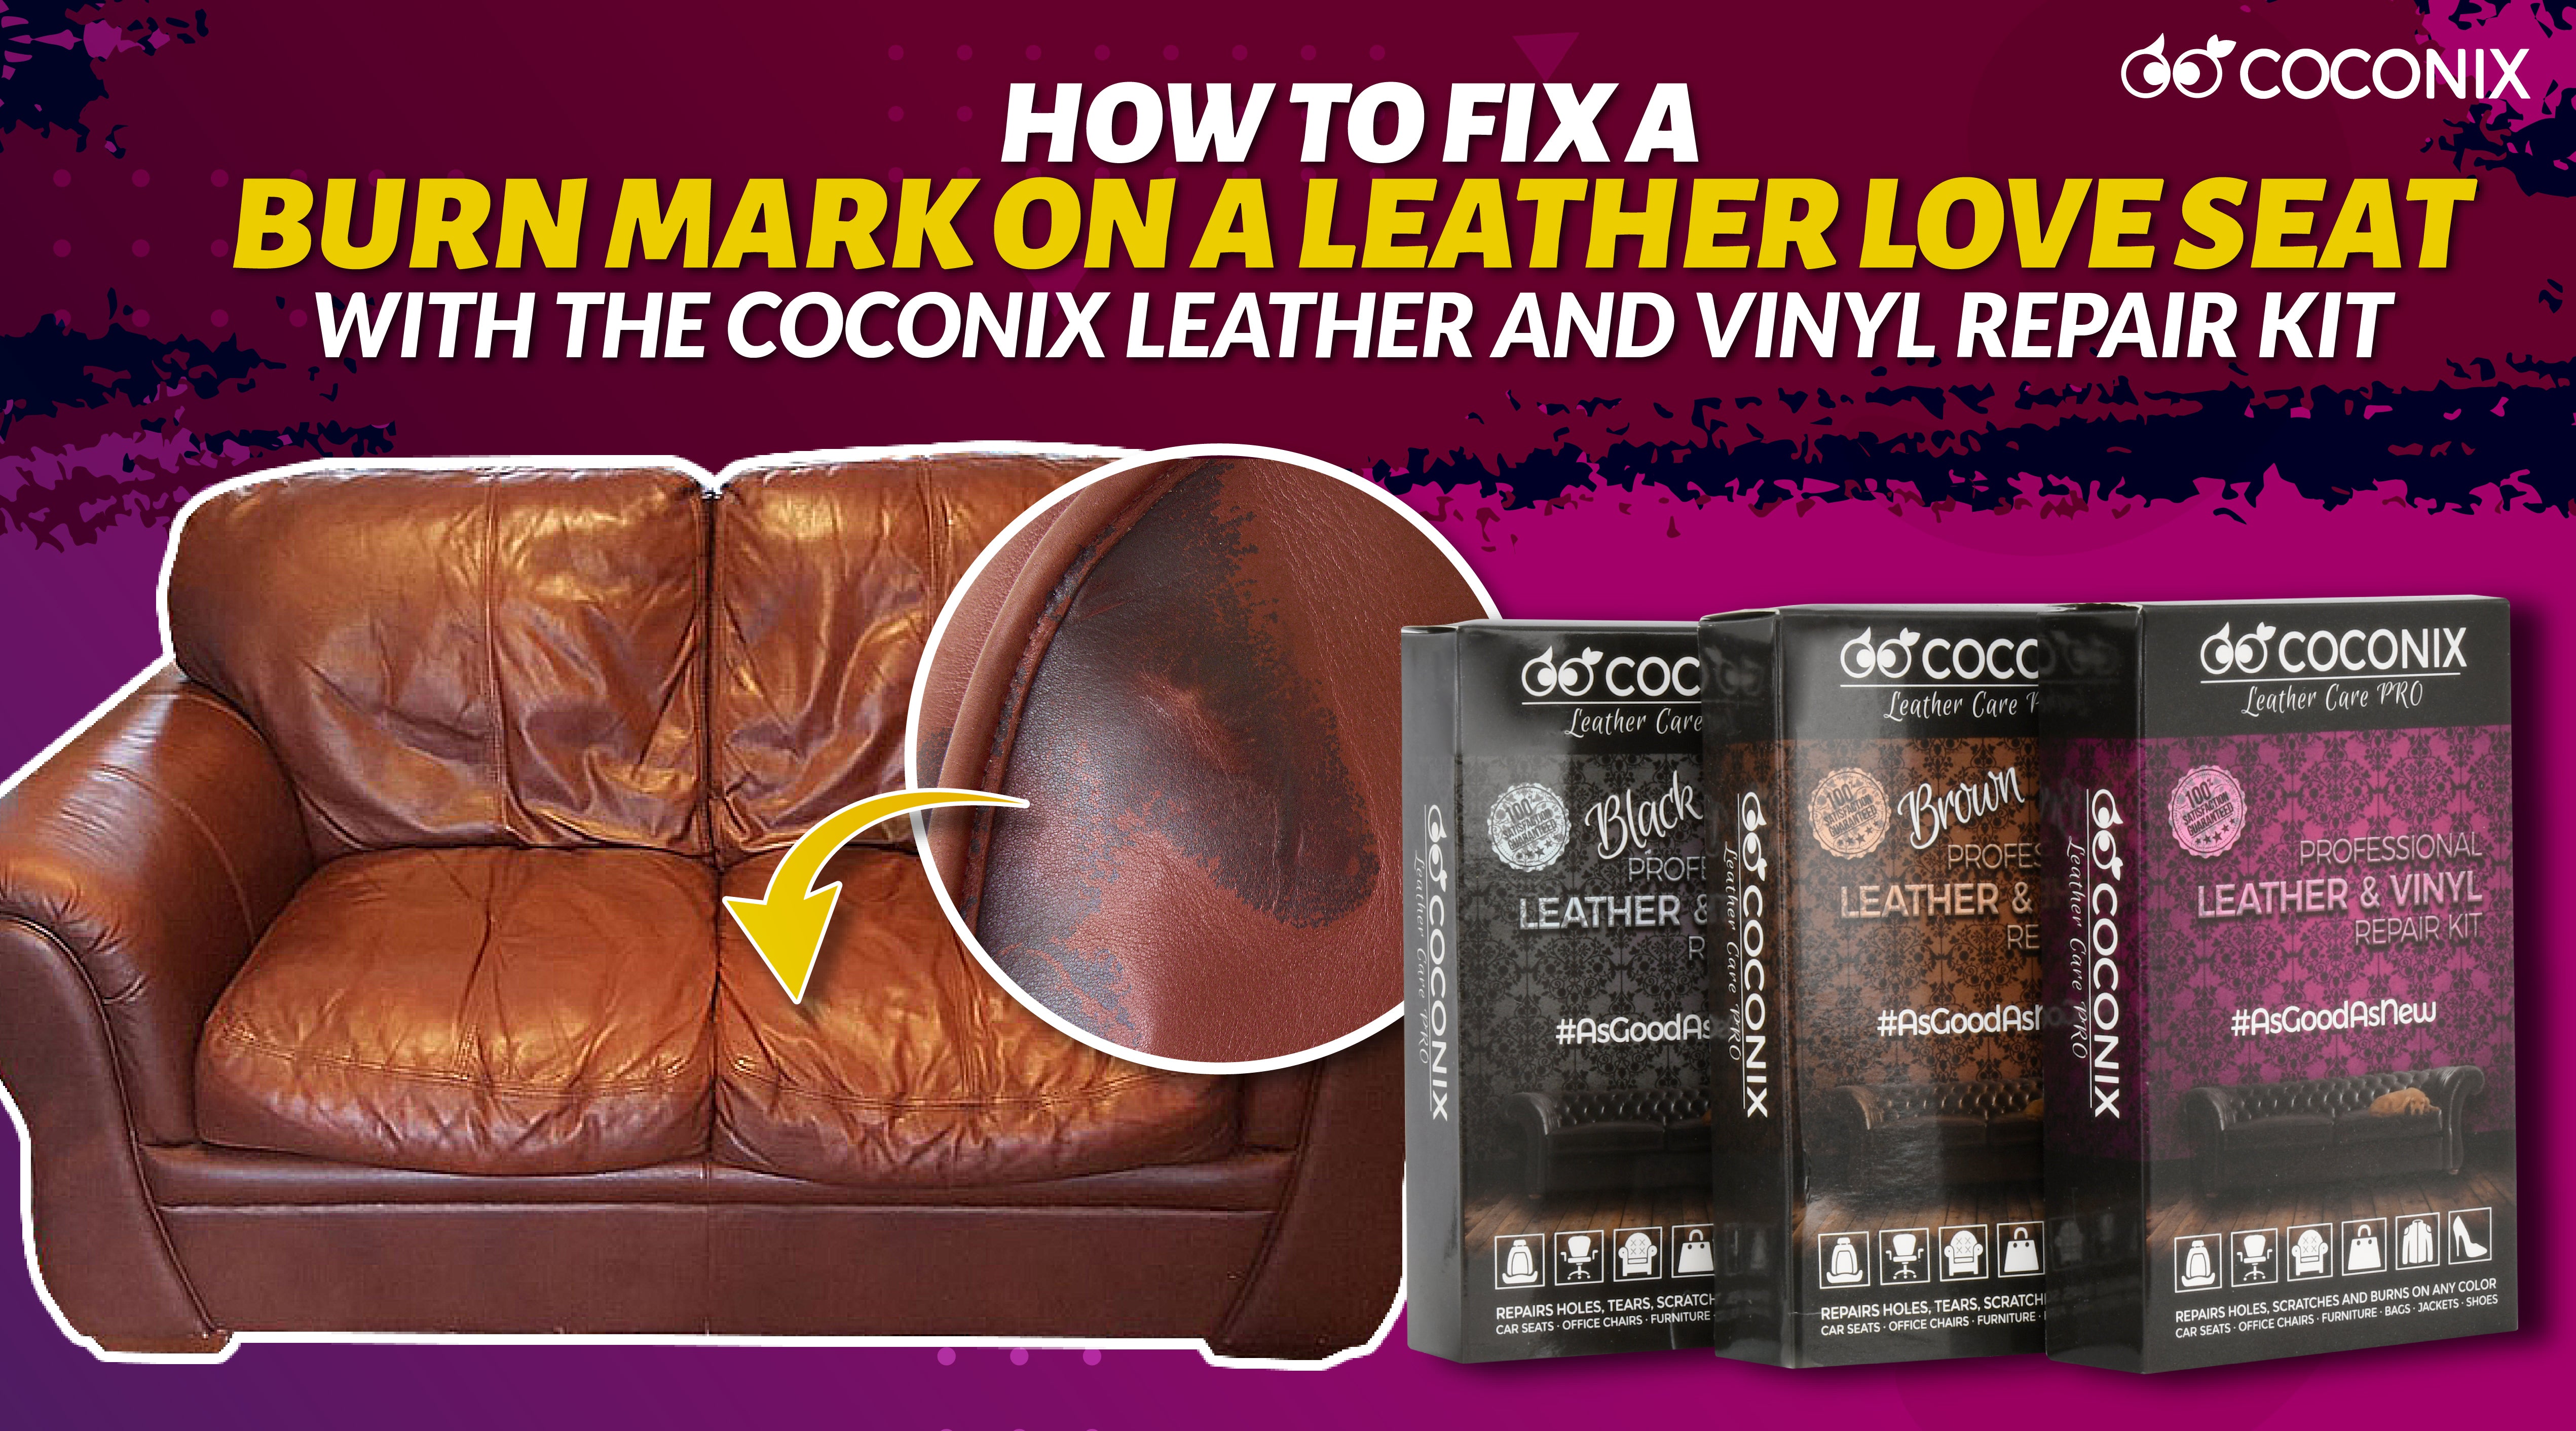 Leather Repair Kit for Home - Revive Your Leather Couch with Ease